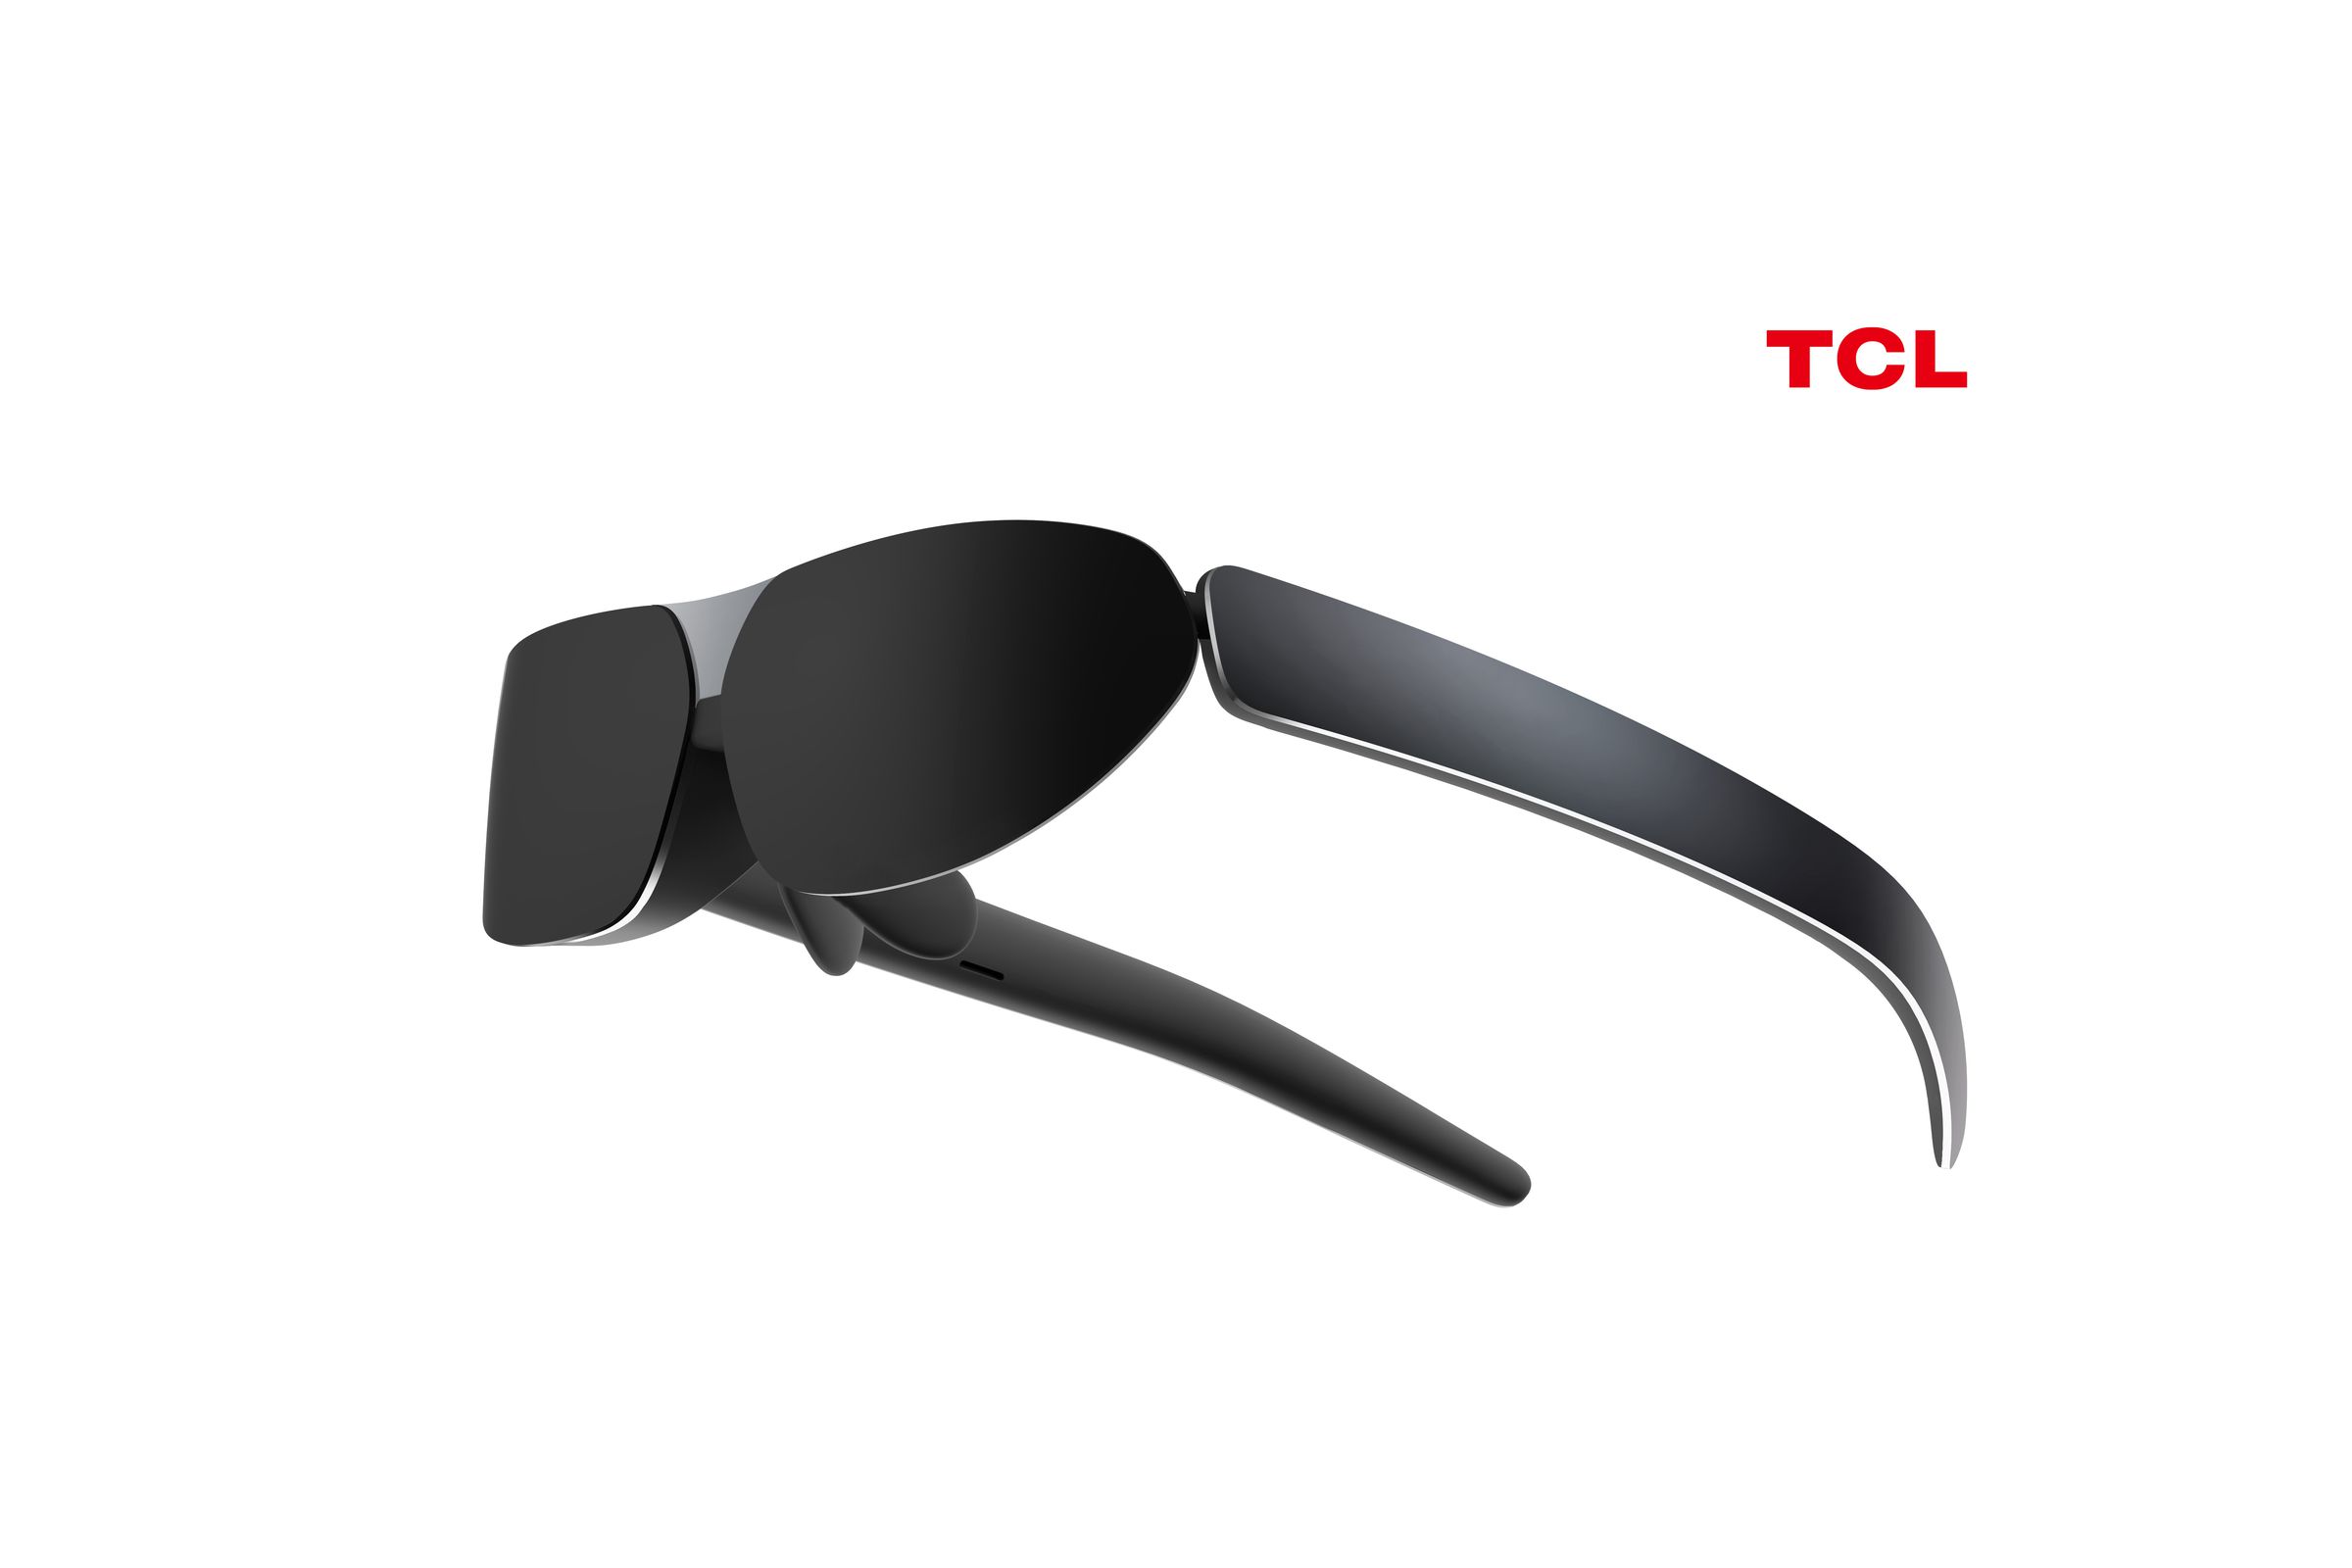 TCL’s aptly named Wearable Display.